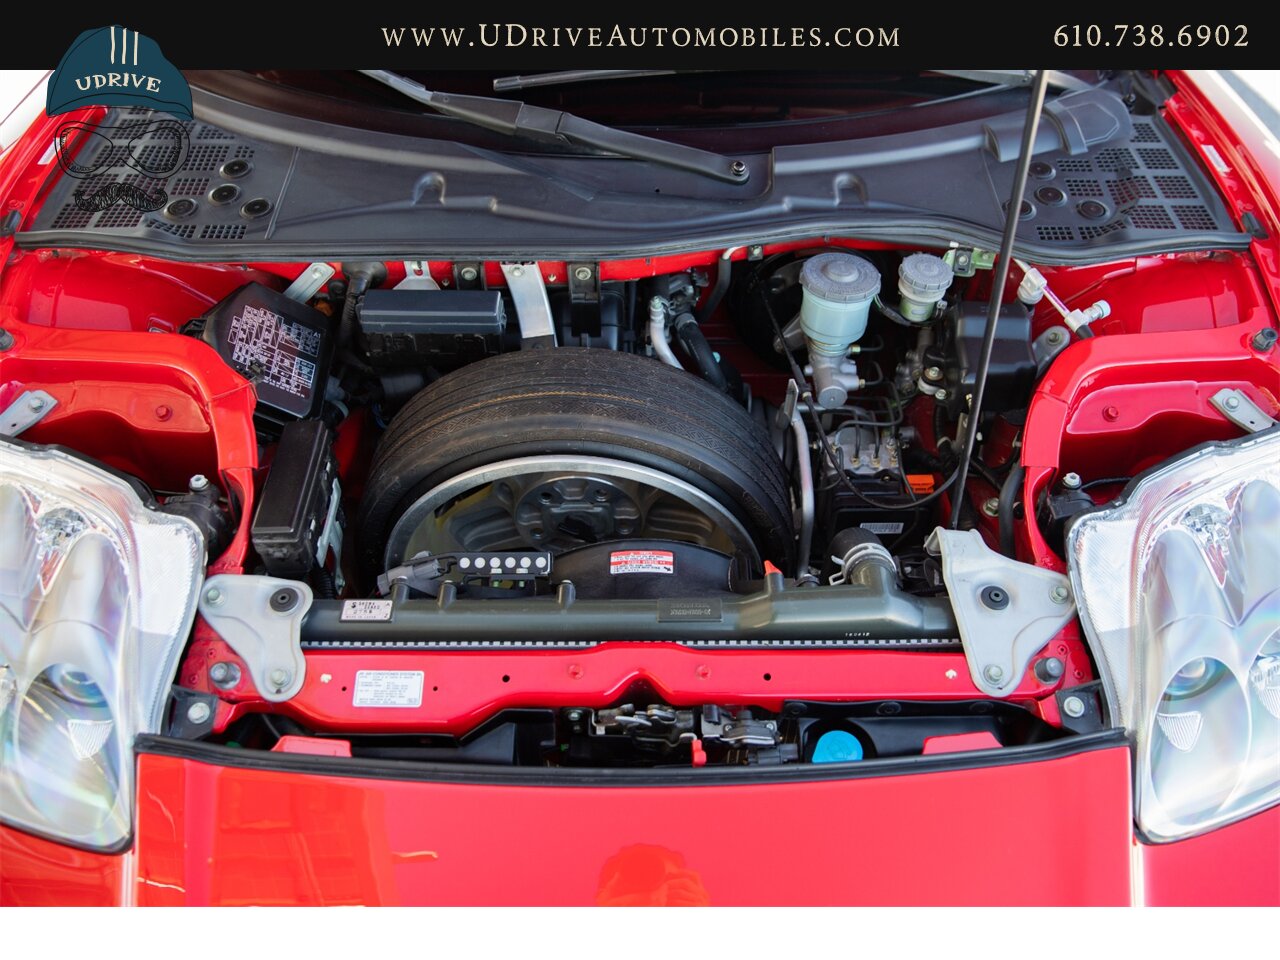 2004 Acura NSX NSX-T 21k mIles Red over Black  Fresh Timing Belt Service - Photo 38 - West Chester, PA 19382